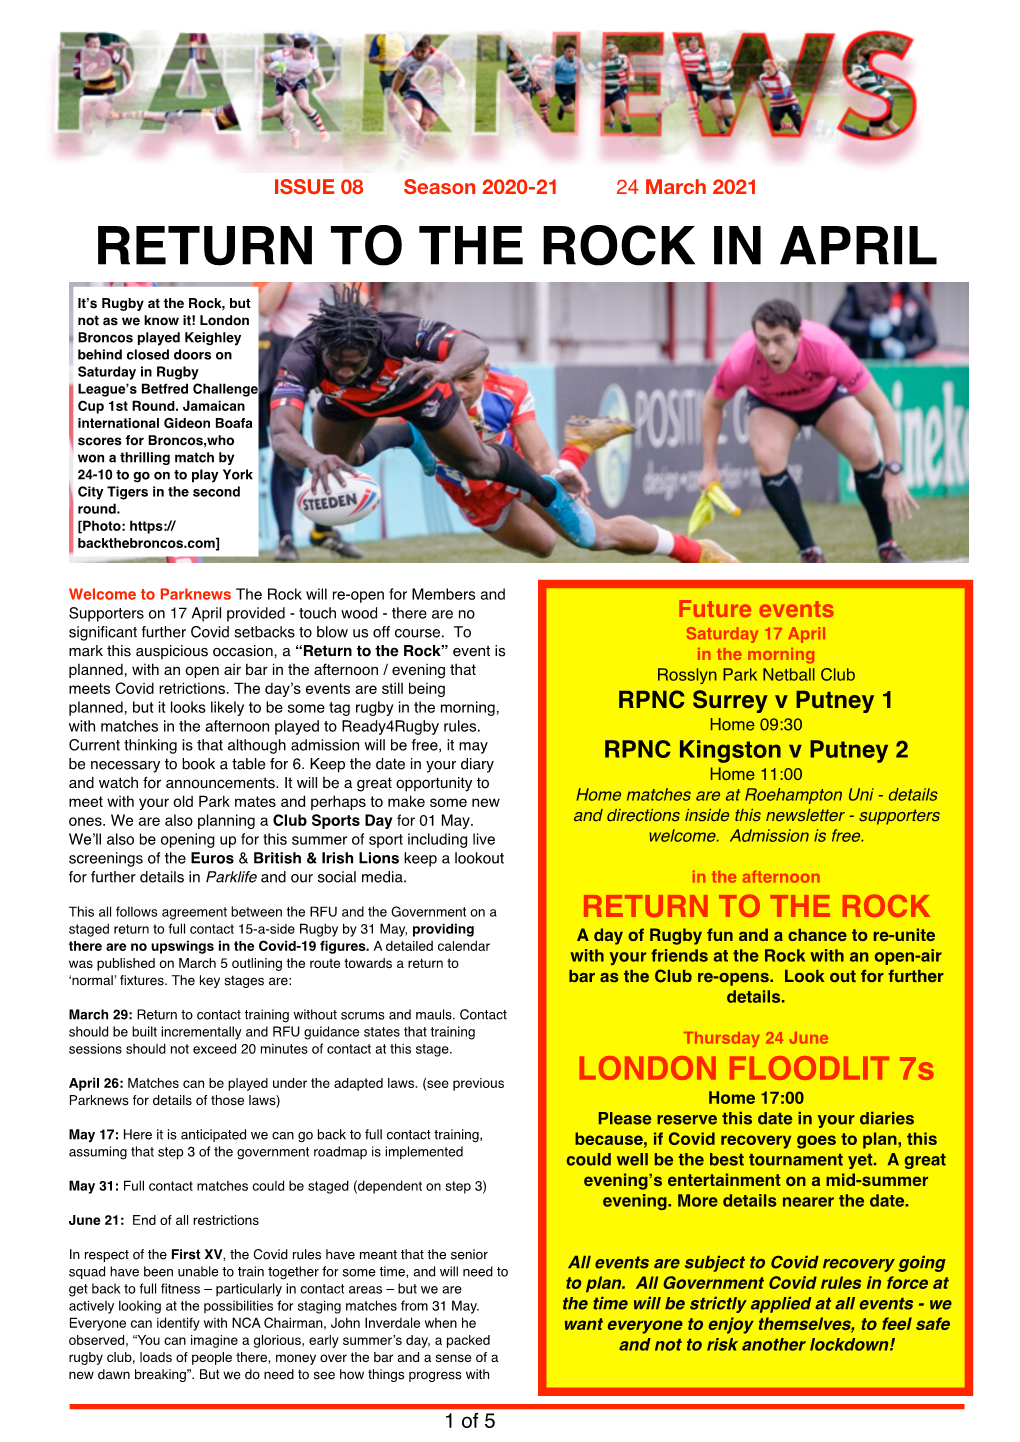 Parknews 22 March 2021 Online Here